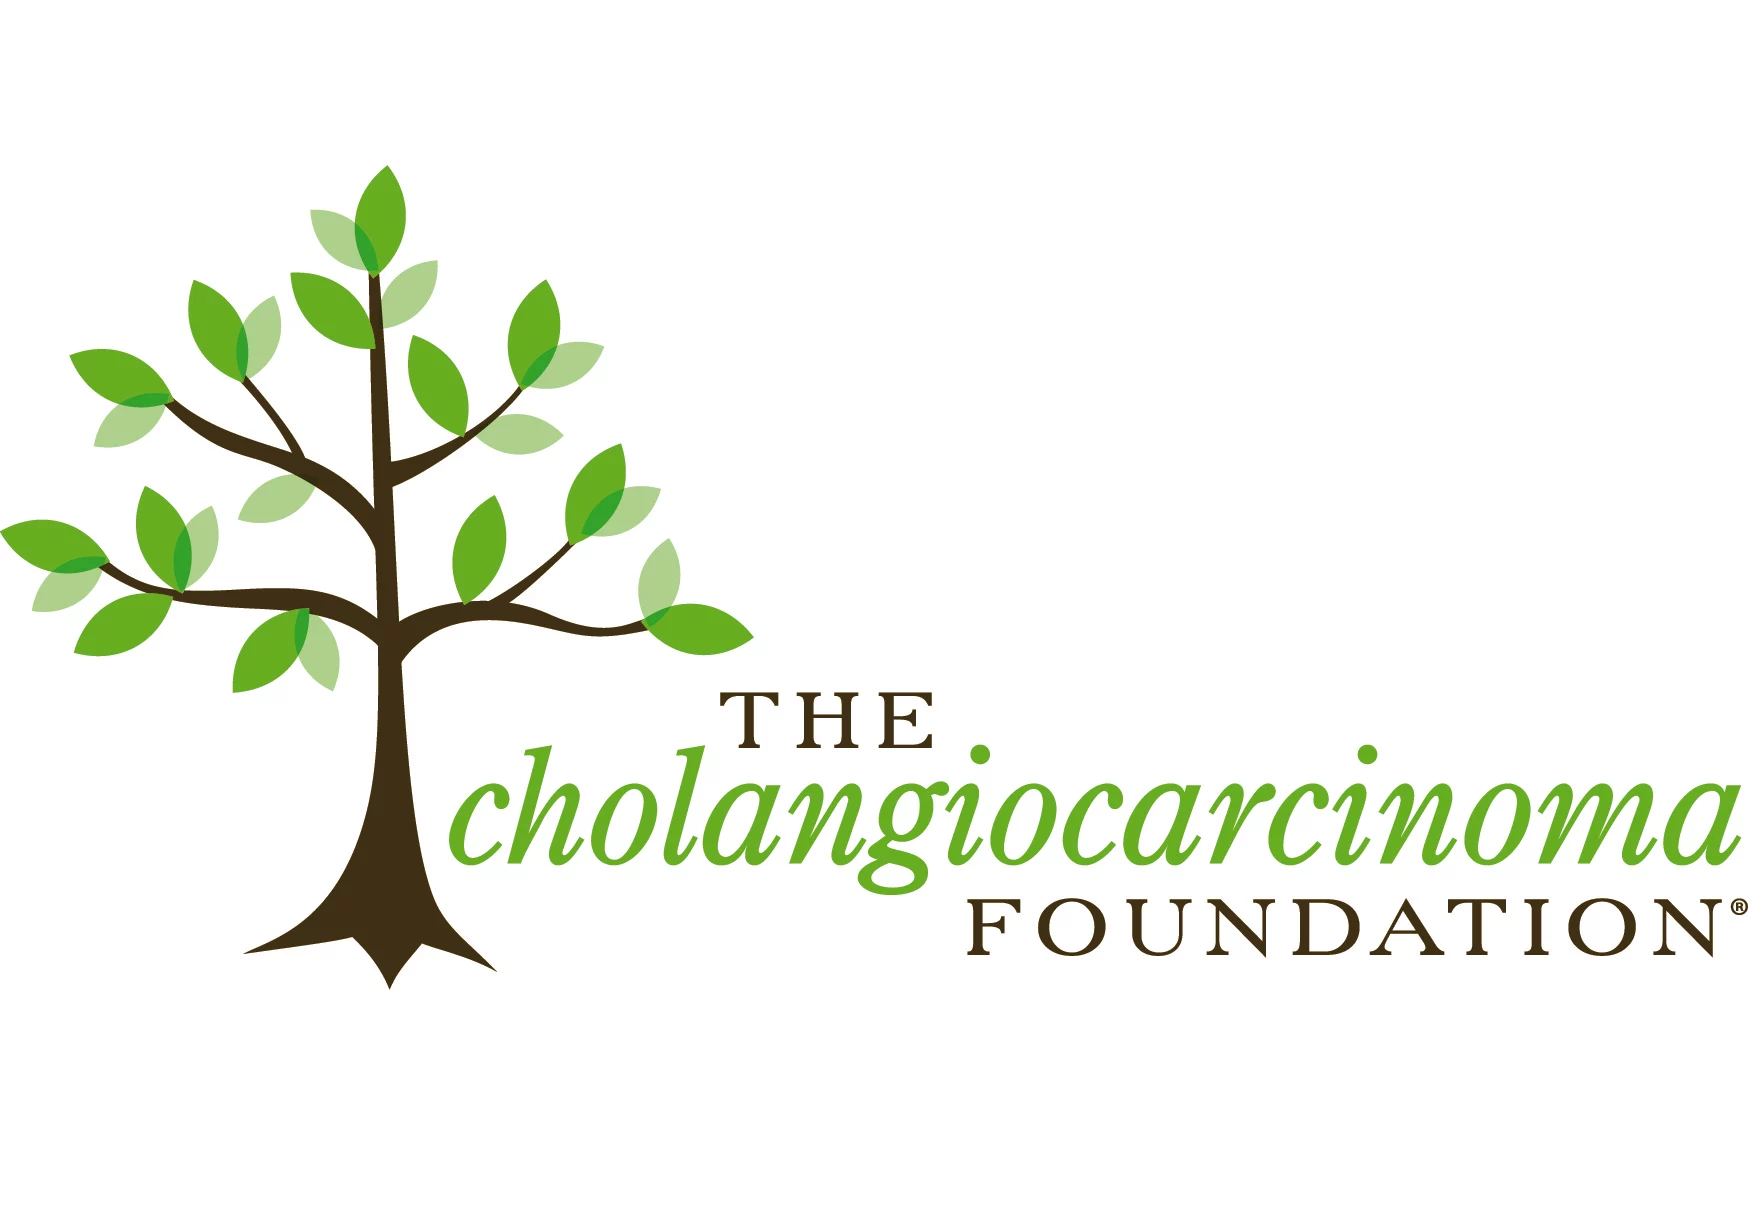 Cholangiocarcinoma Foundation raises more than $76,000 in  2nd Annual Moving for the Cure